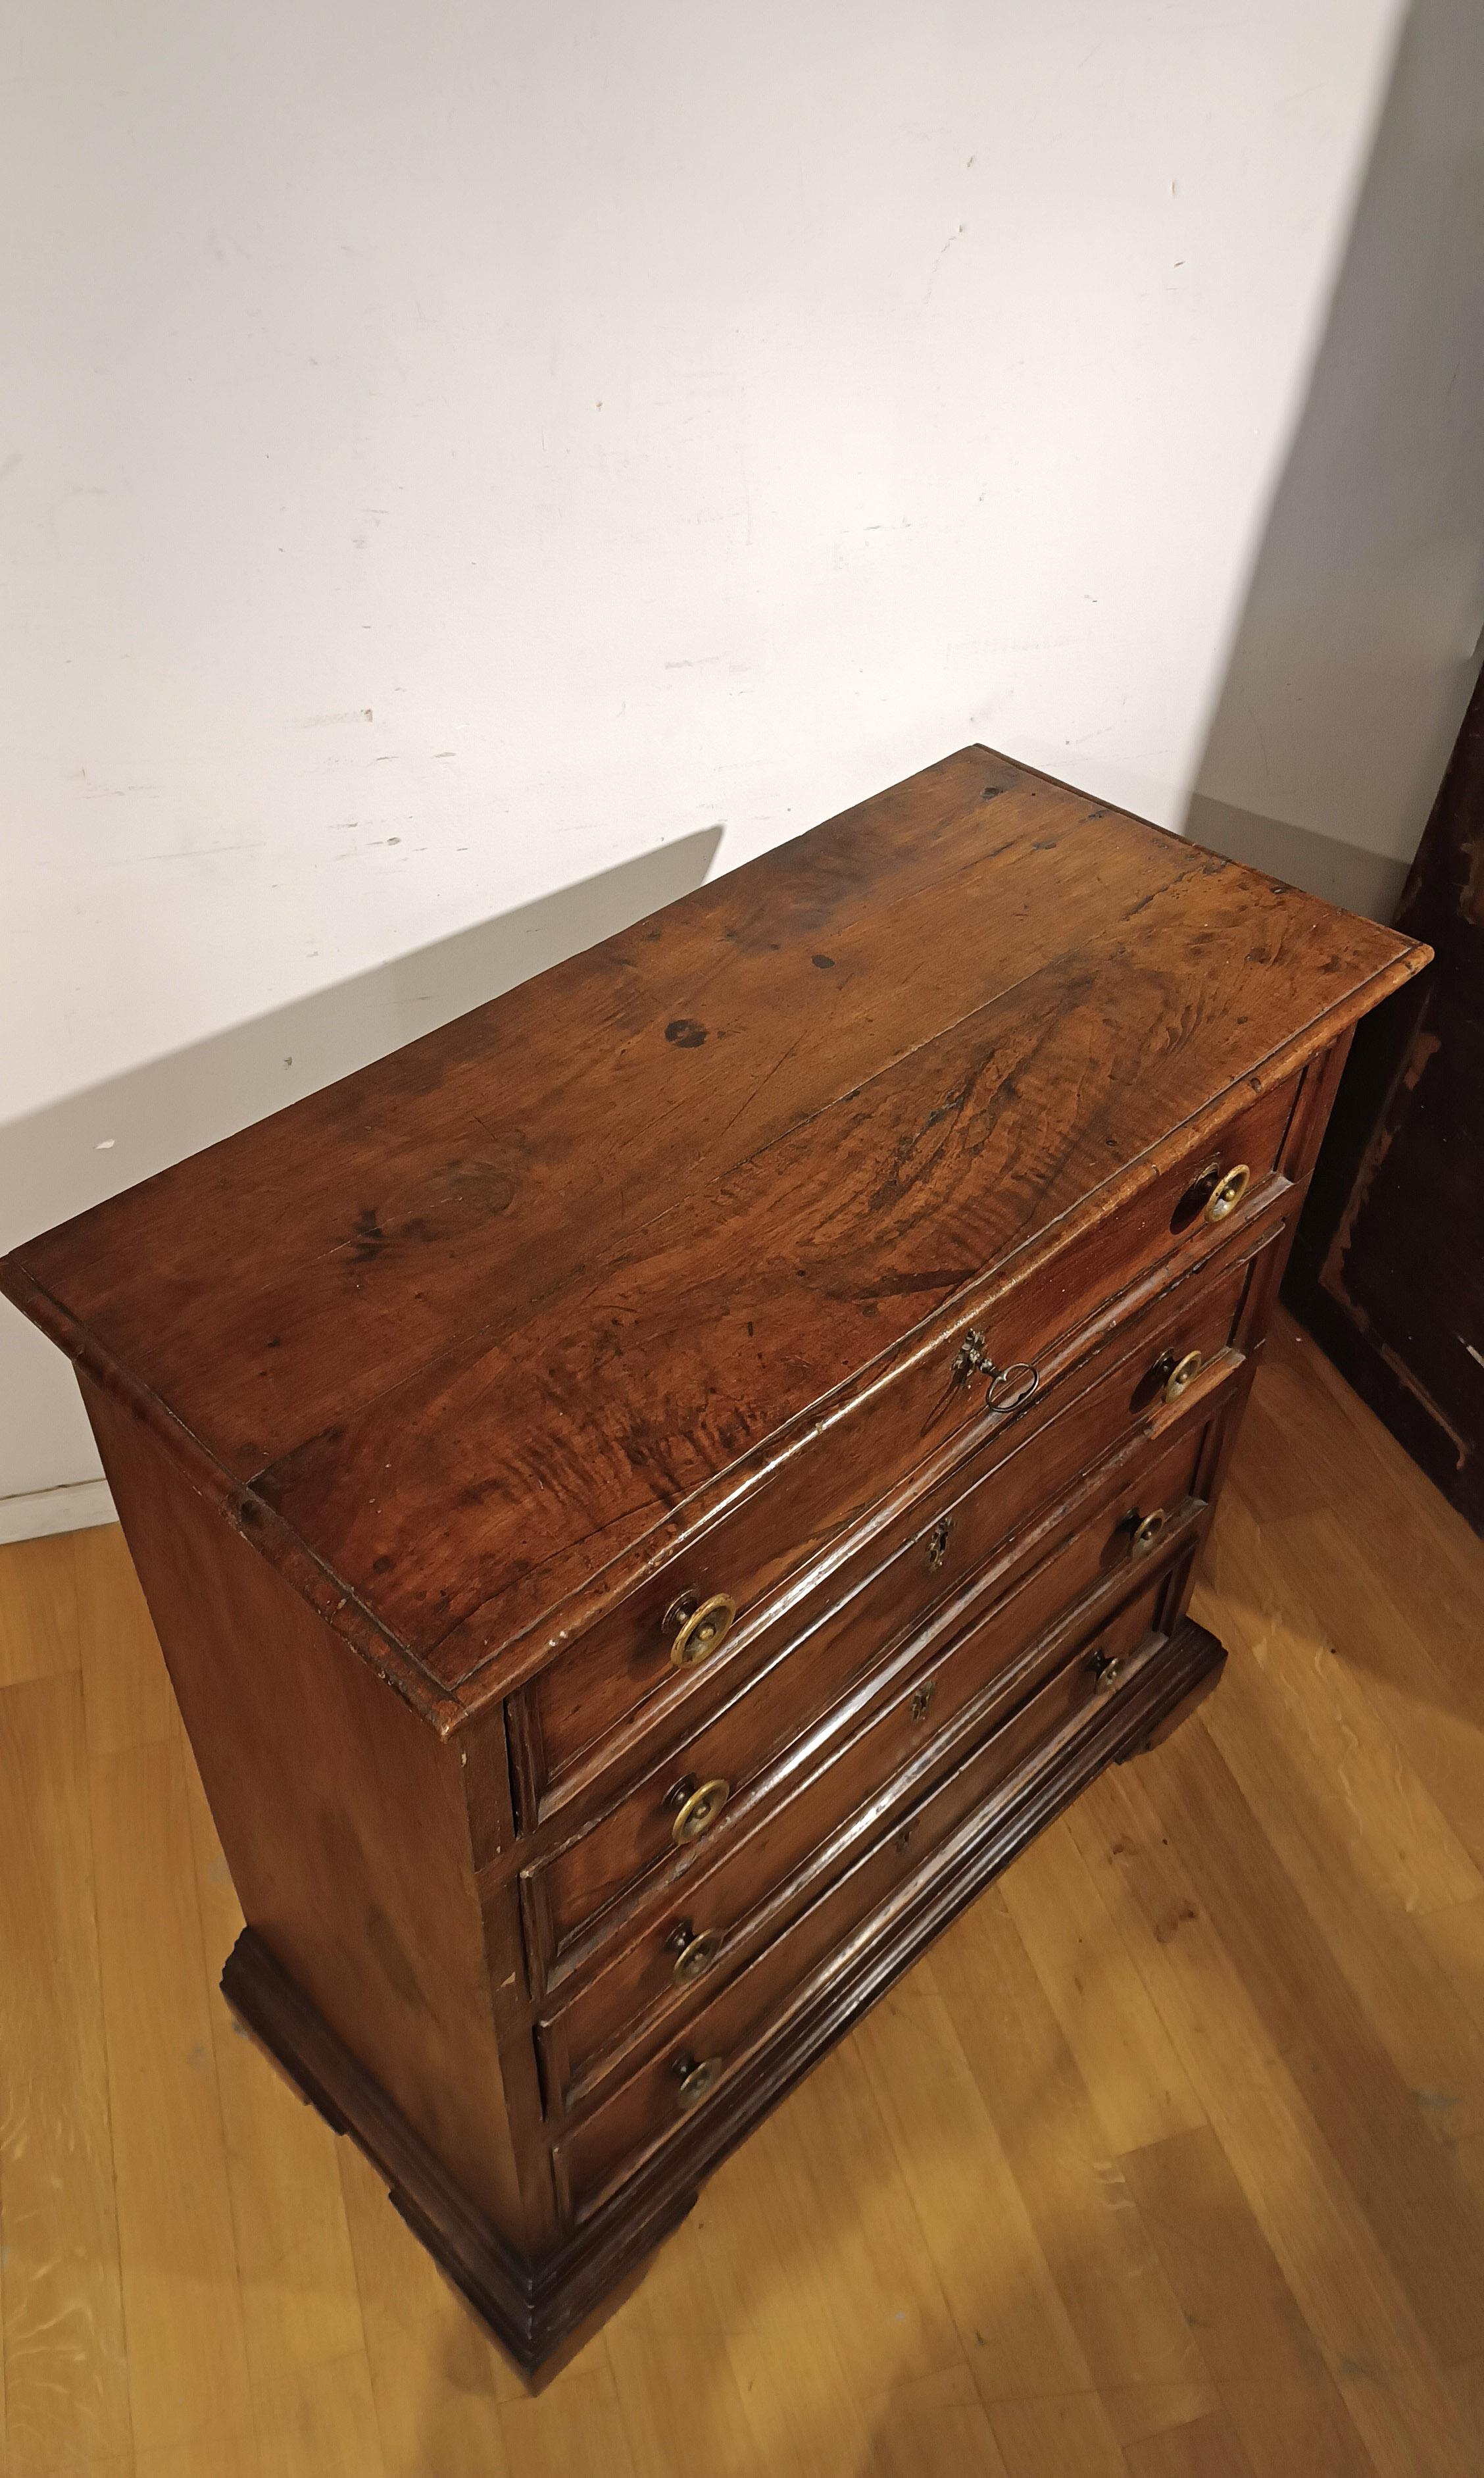 17th Century 17th CENTURY CHEST OF DRAWERS IN SOLID AND VENEREED WALNUT